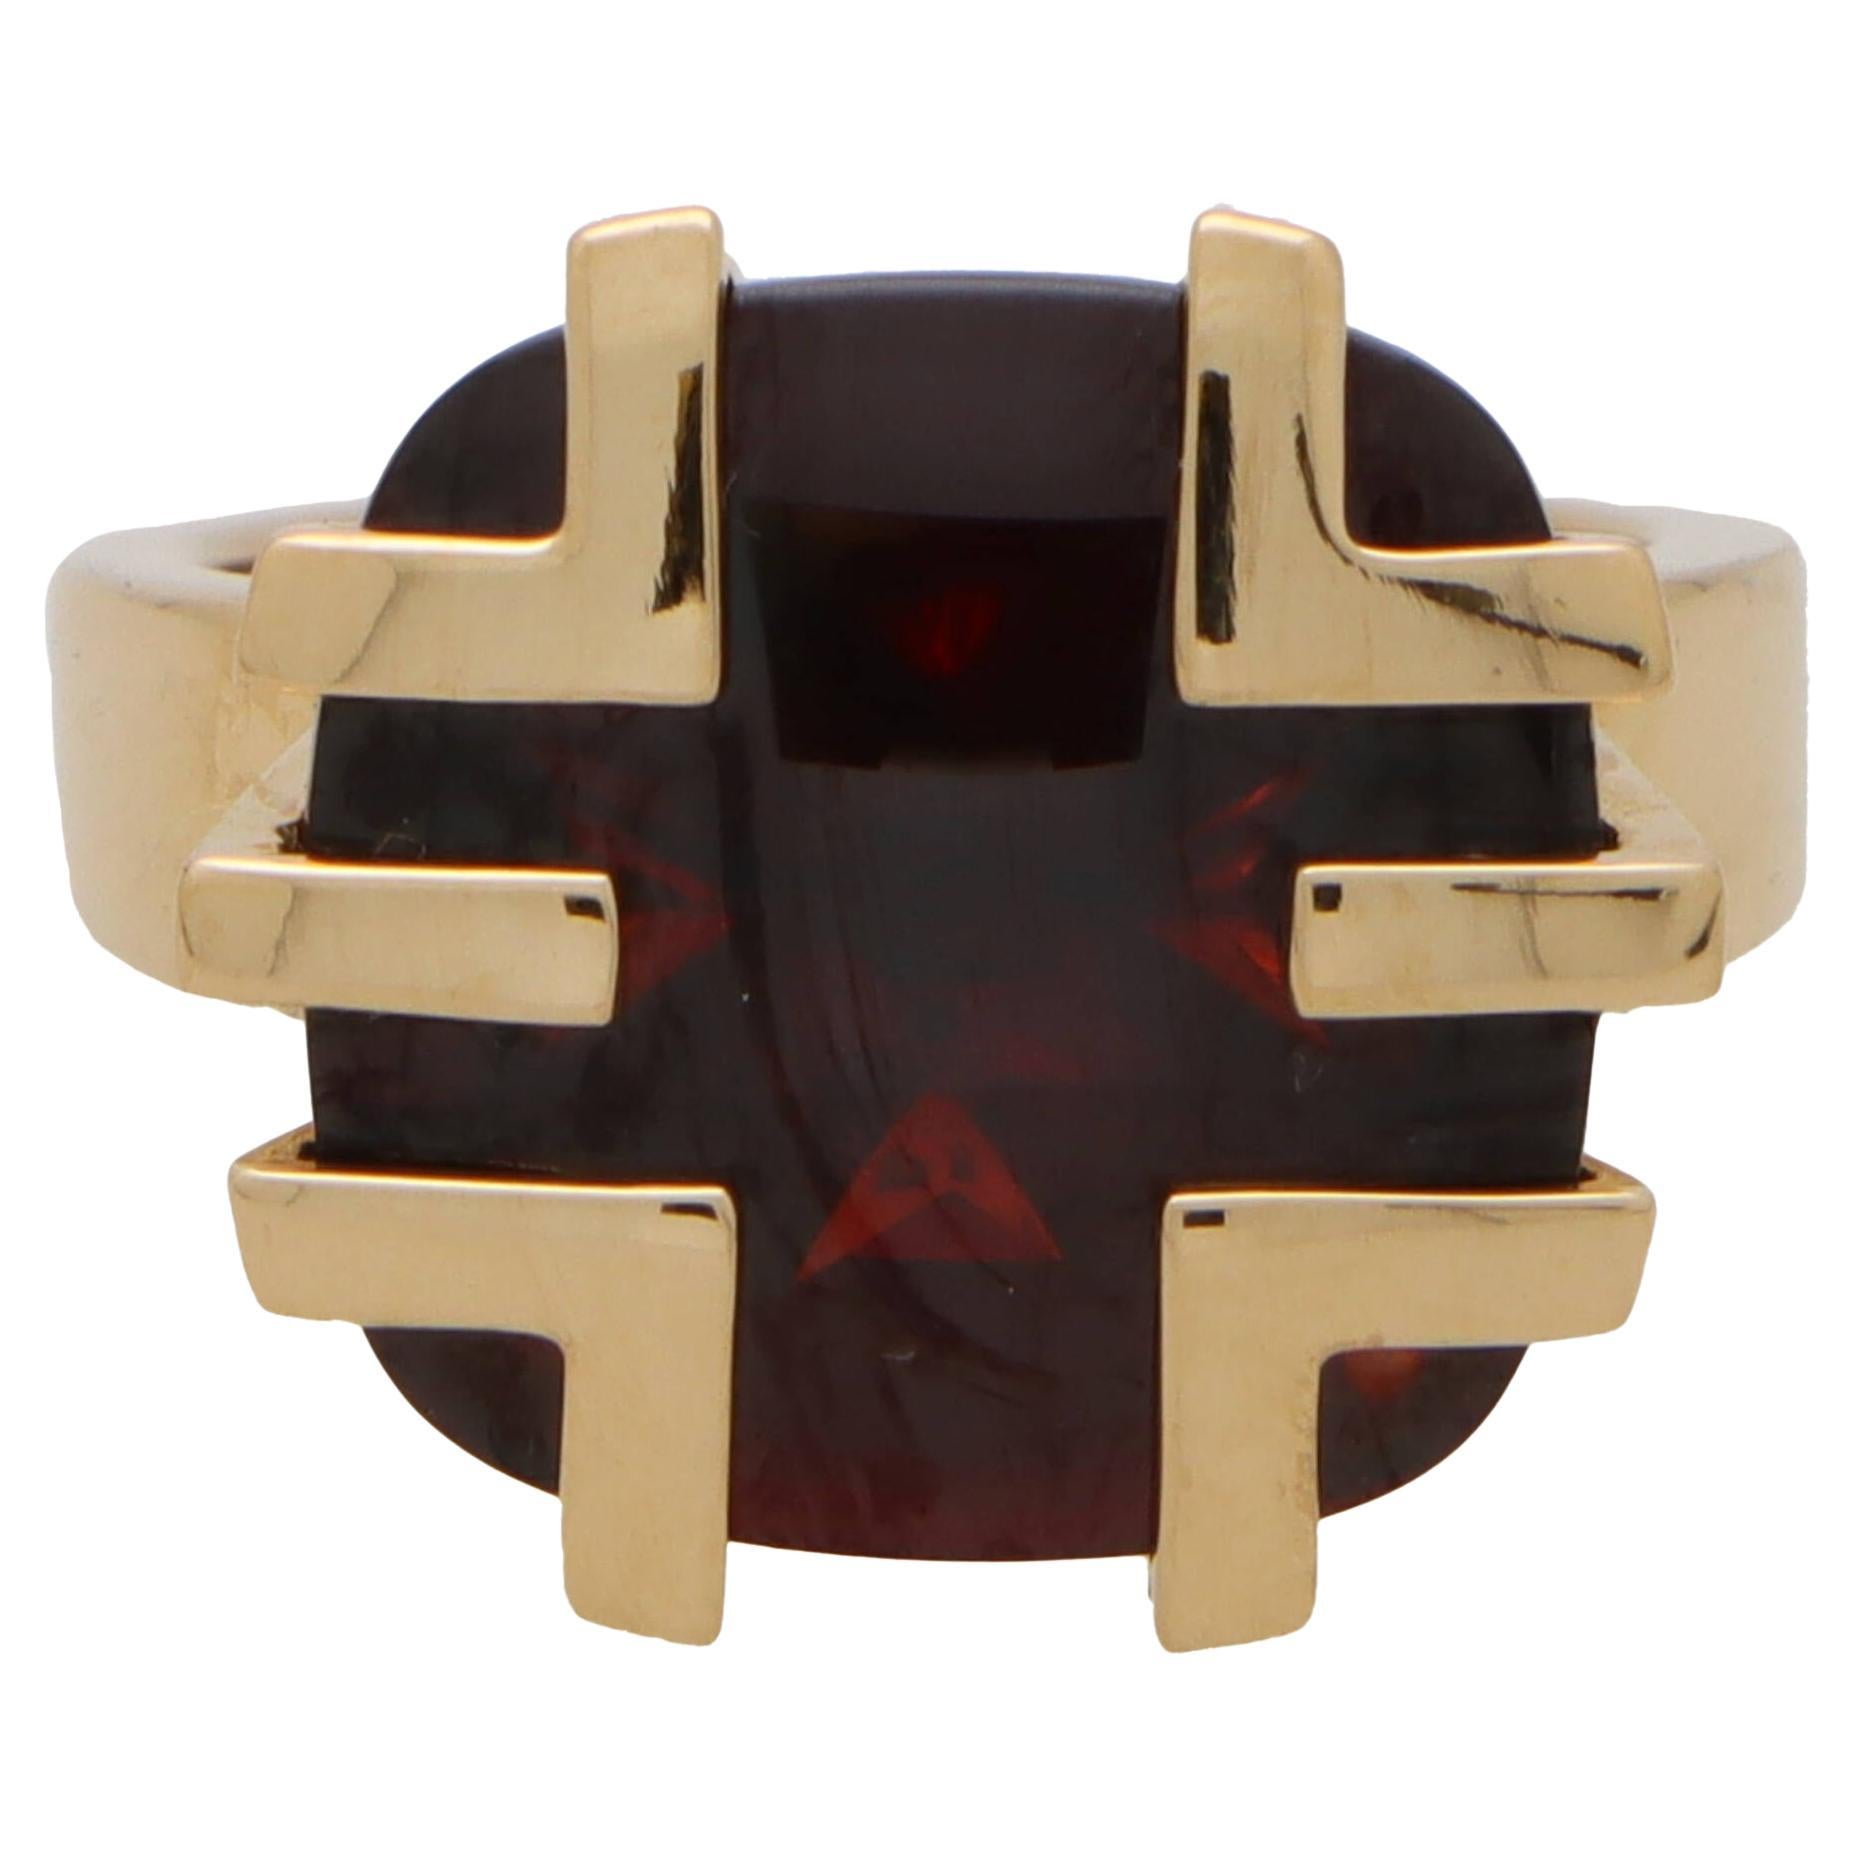  Vintage Cartier 'Kiss of the Dragon' Garnet Ring in 18k Yellow Gold